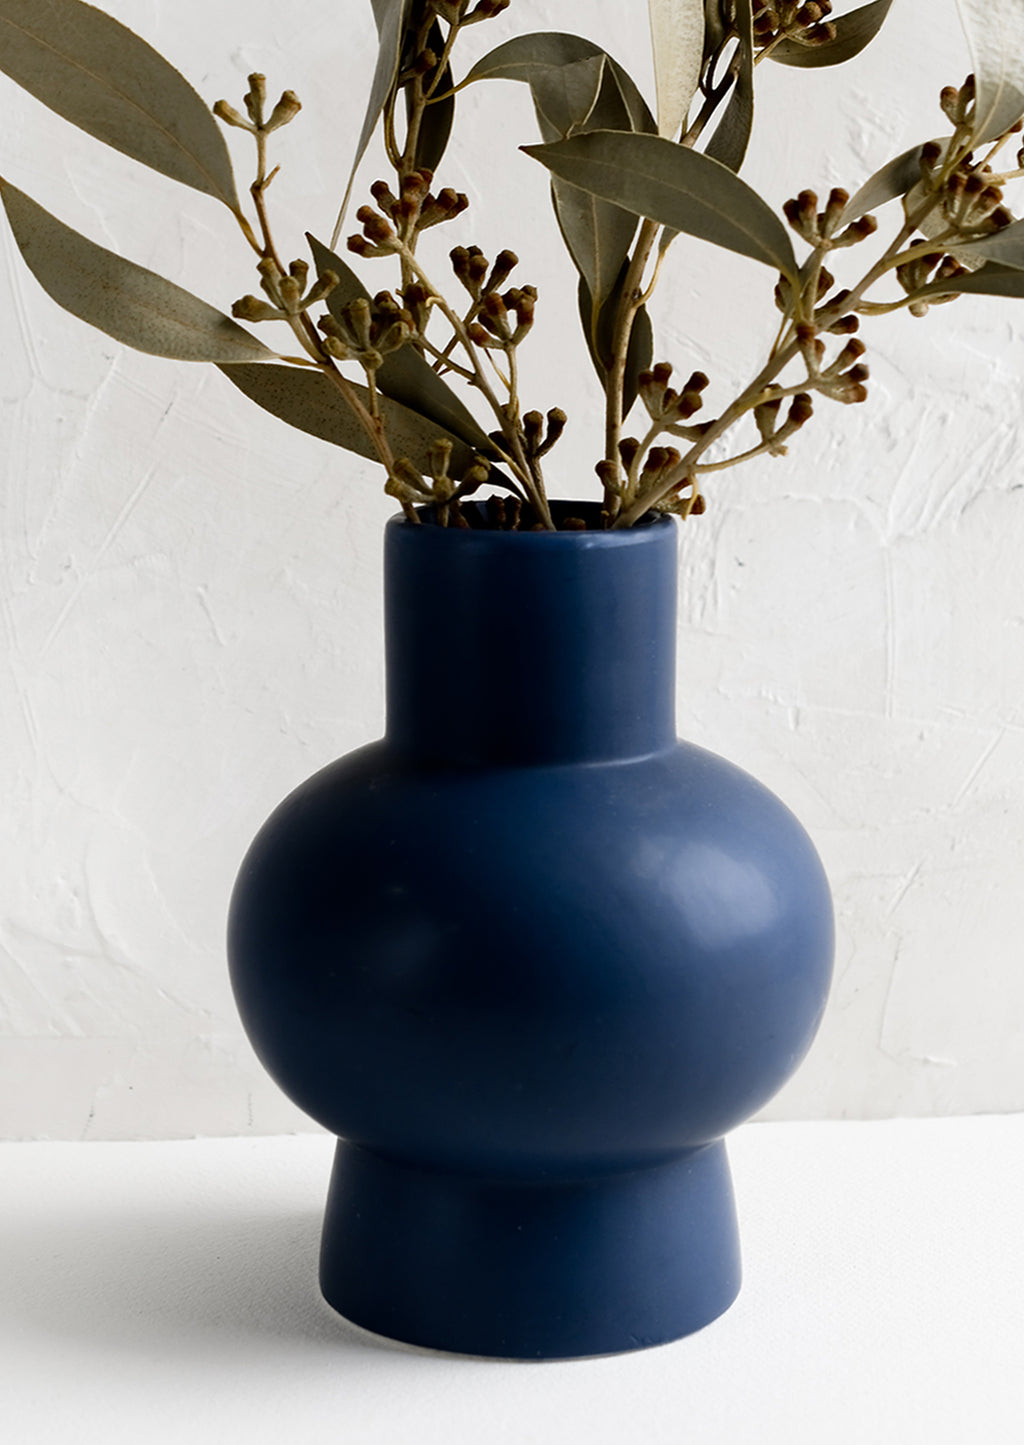 2: A navy blue sculptural ceramic vase with dried eucalyptus.